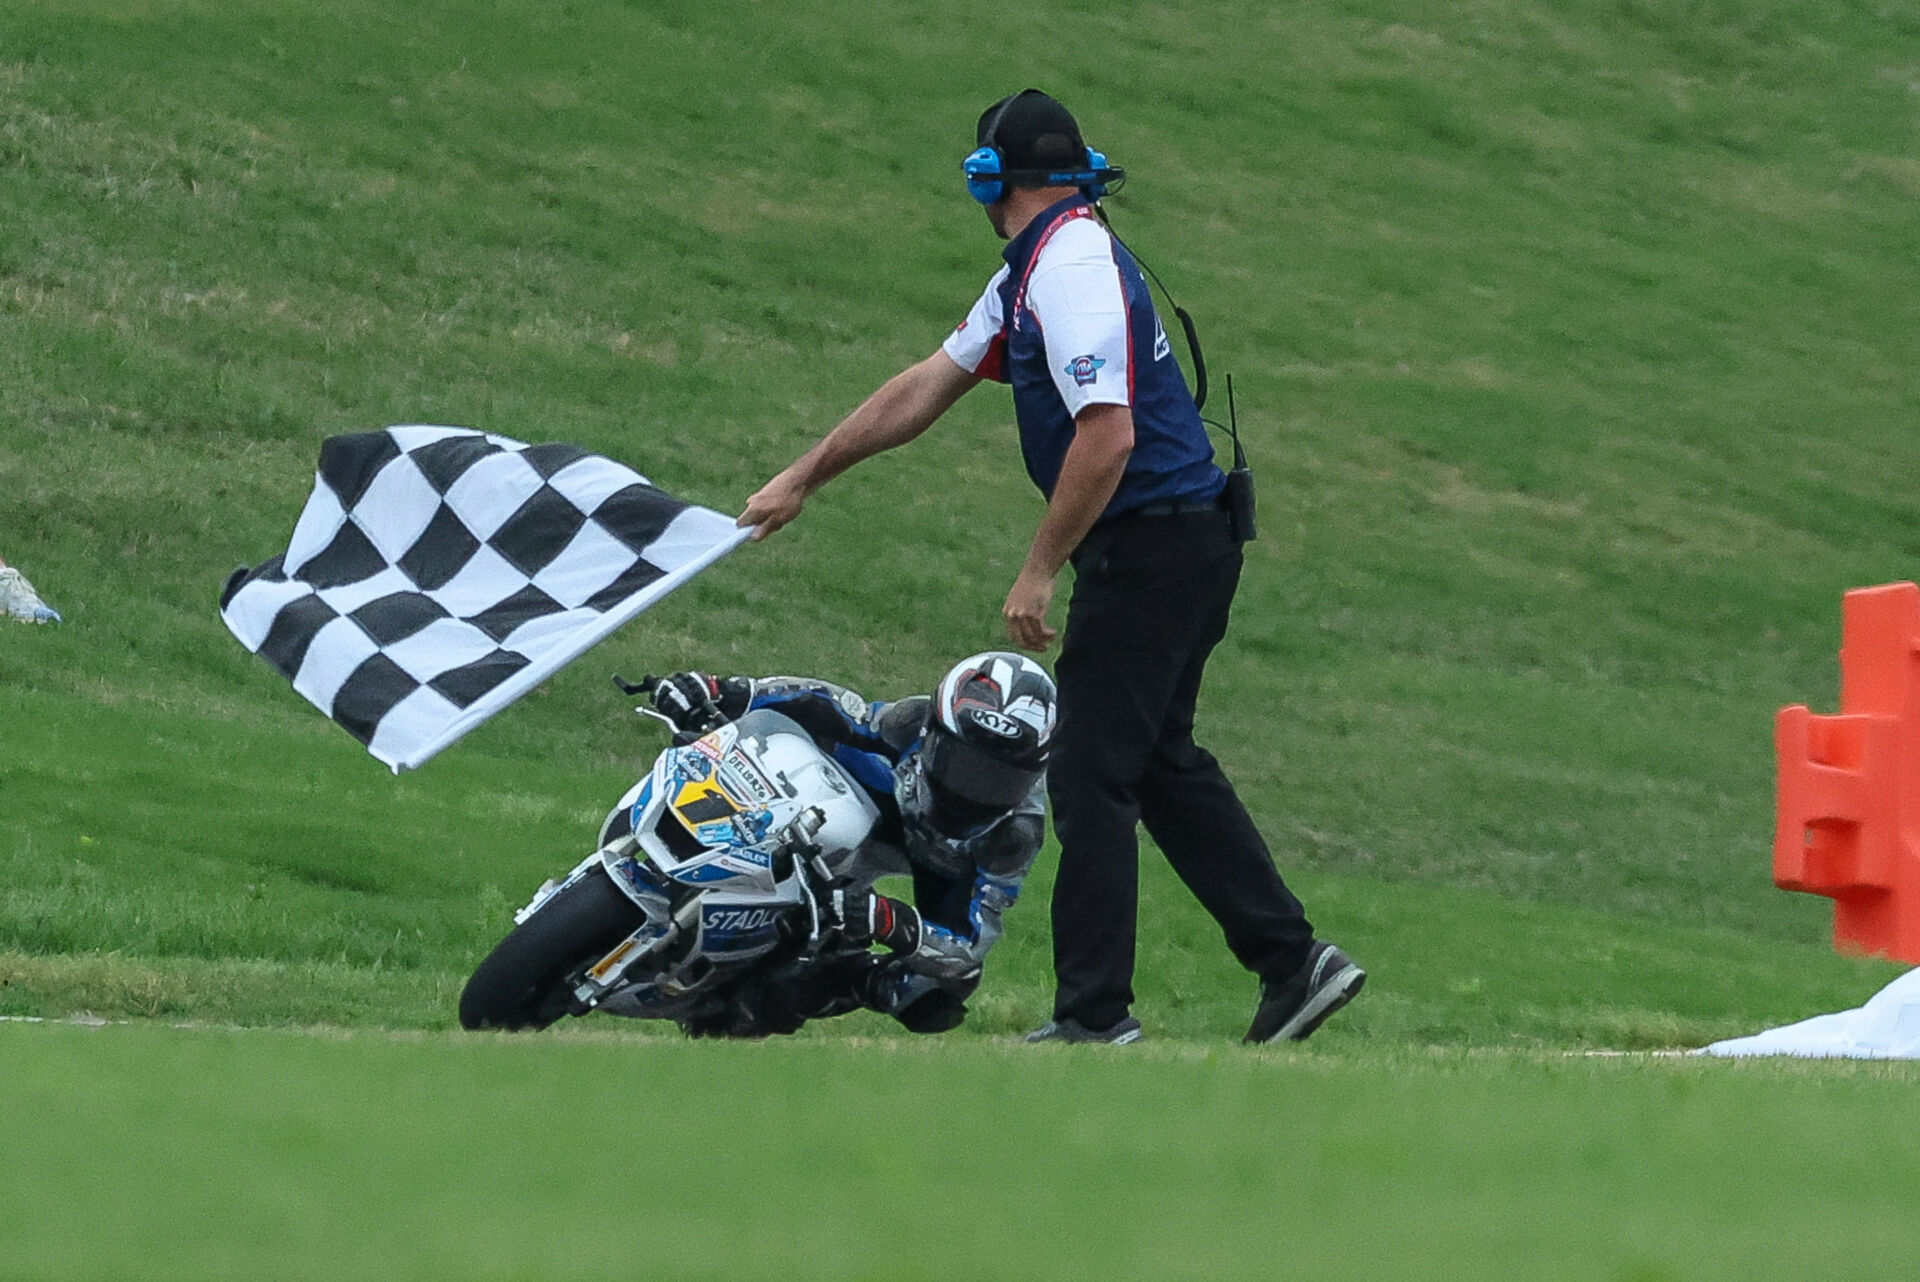 The Mission MIni Cup By Motul National Final at Road America will be streamed live on MotoAmerica Live+. Photo by Brian J. Nelson.